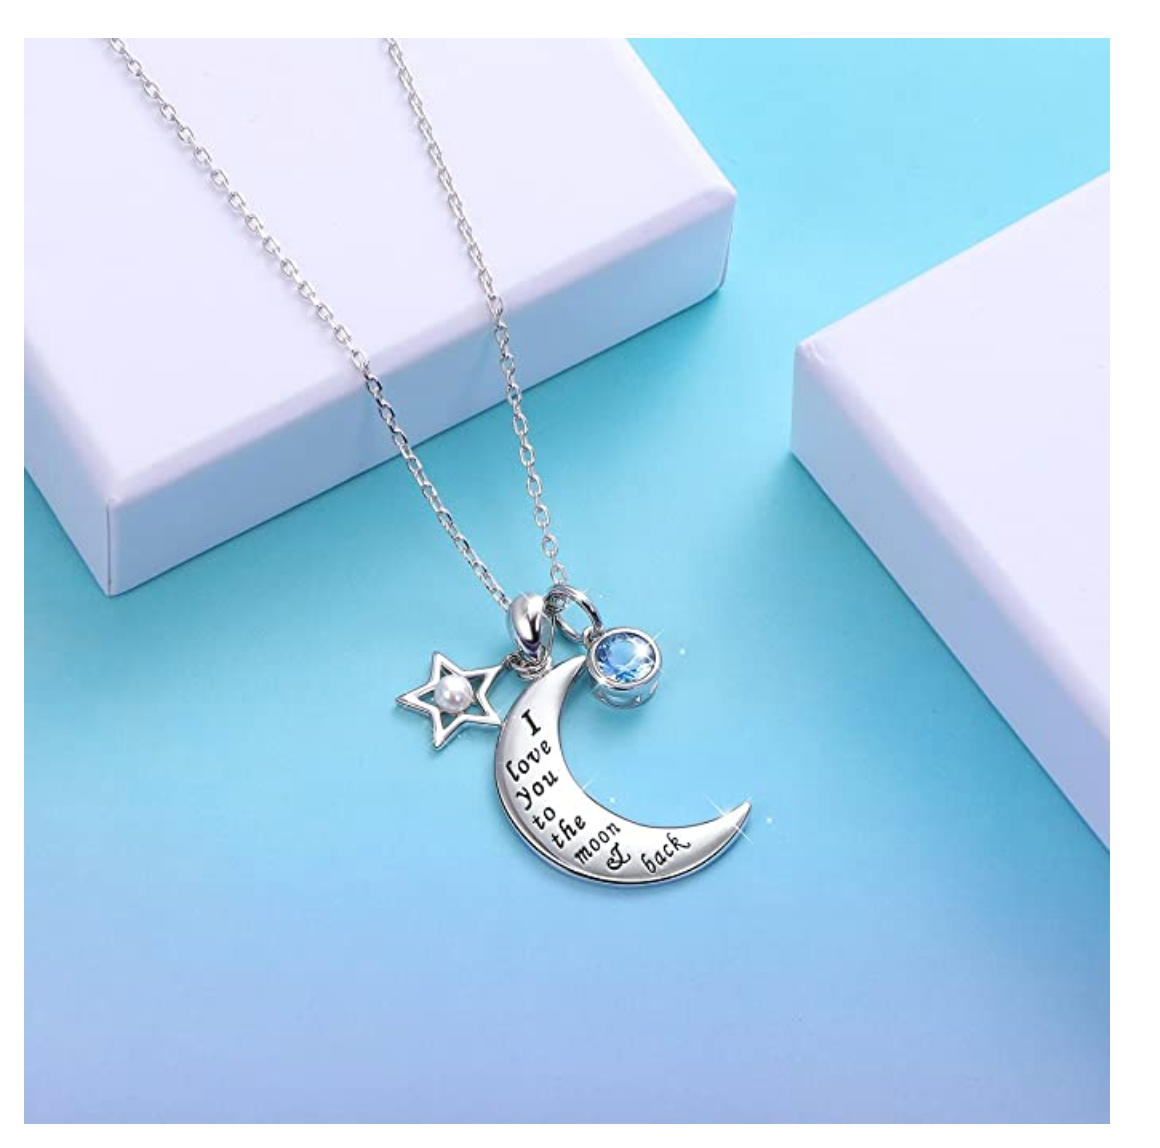 925 Sterling Silver Crescent Moon Necklace Turkish Simulated Diamond Star Islamic Muslim Jewelry Chain Gift I Love You Blue Sapphire Simulated Crystal 18in.